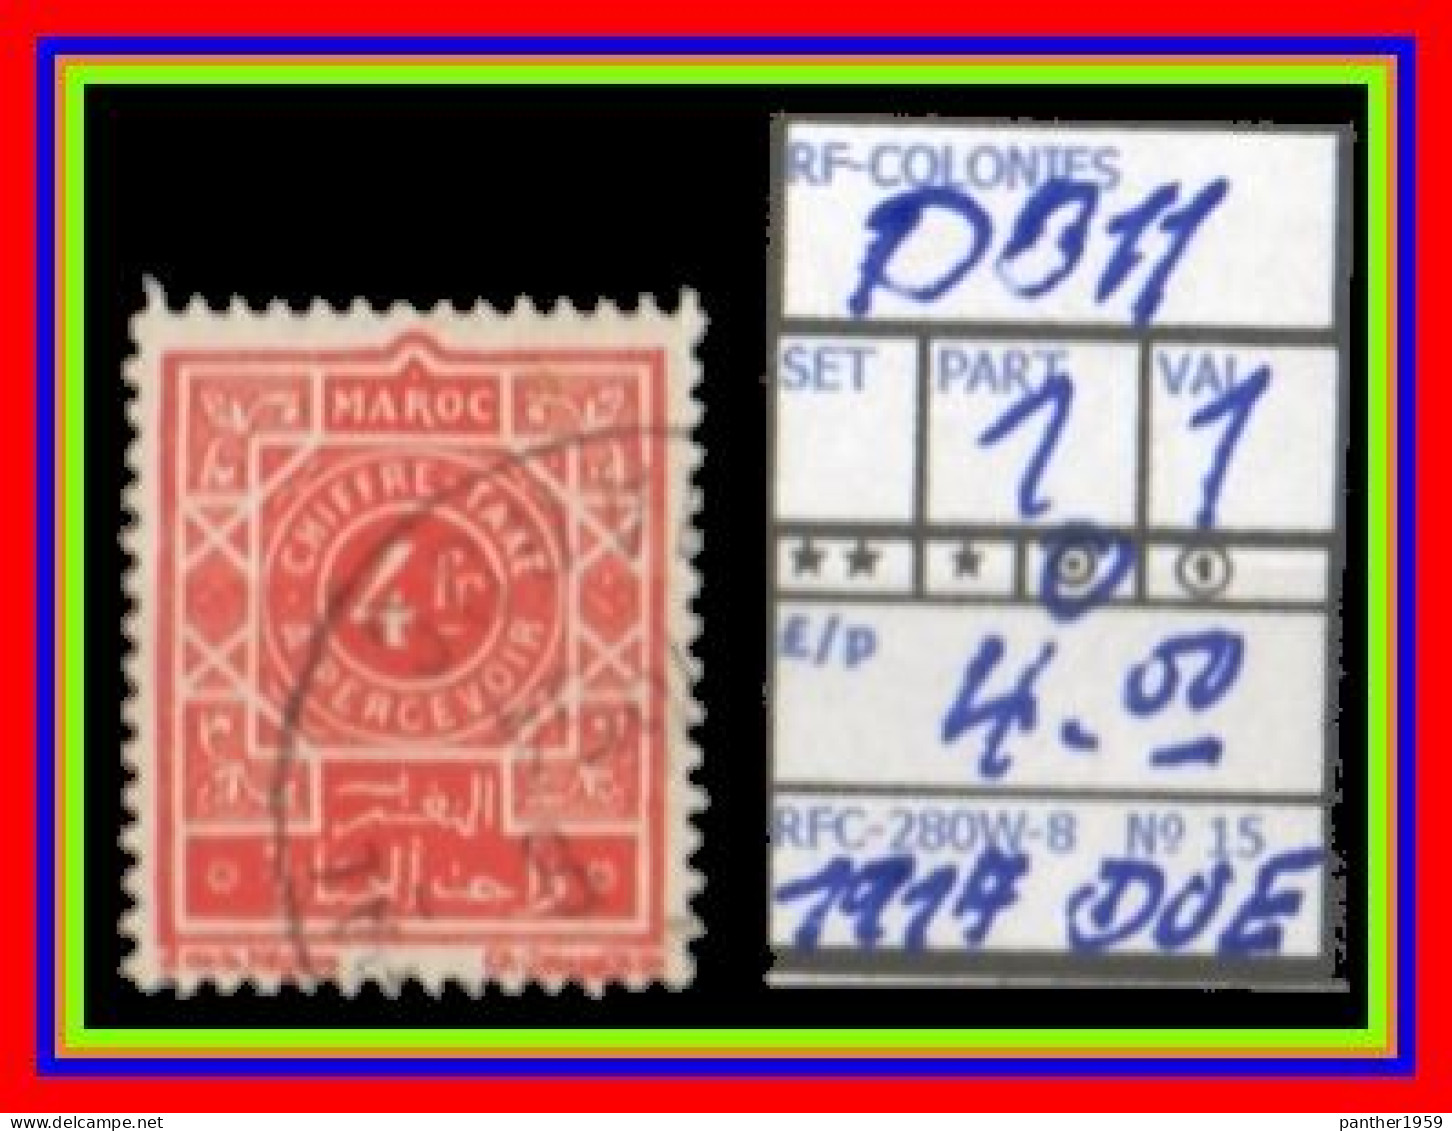 EUROPE>FRANCE COLONIES# MOROCCO# #DEFINITIVES#PARTIAL SET# MNH/**MH*#USED (RFC-280W-8) (15) - Portomarken